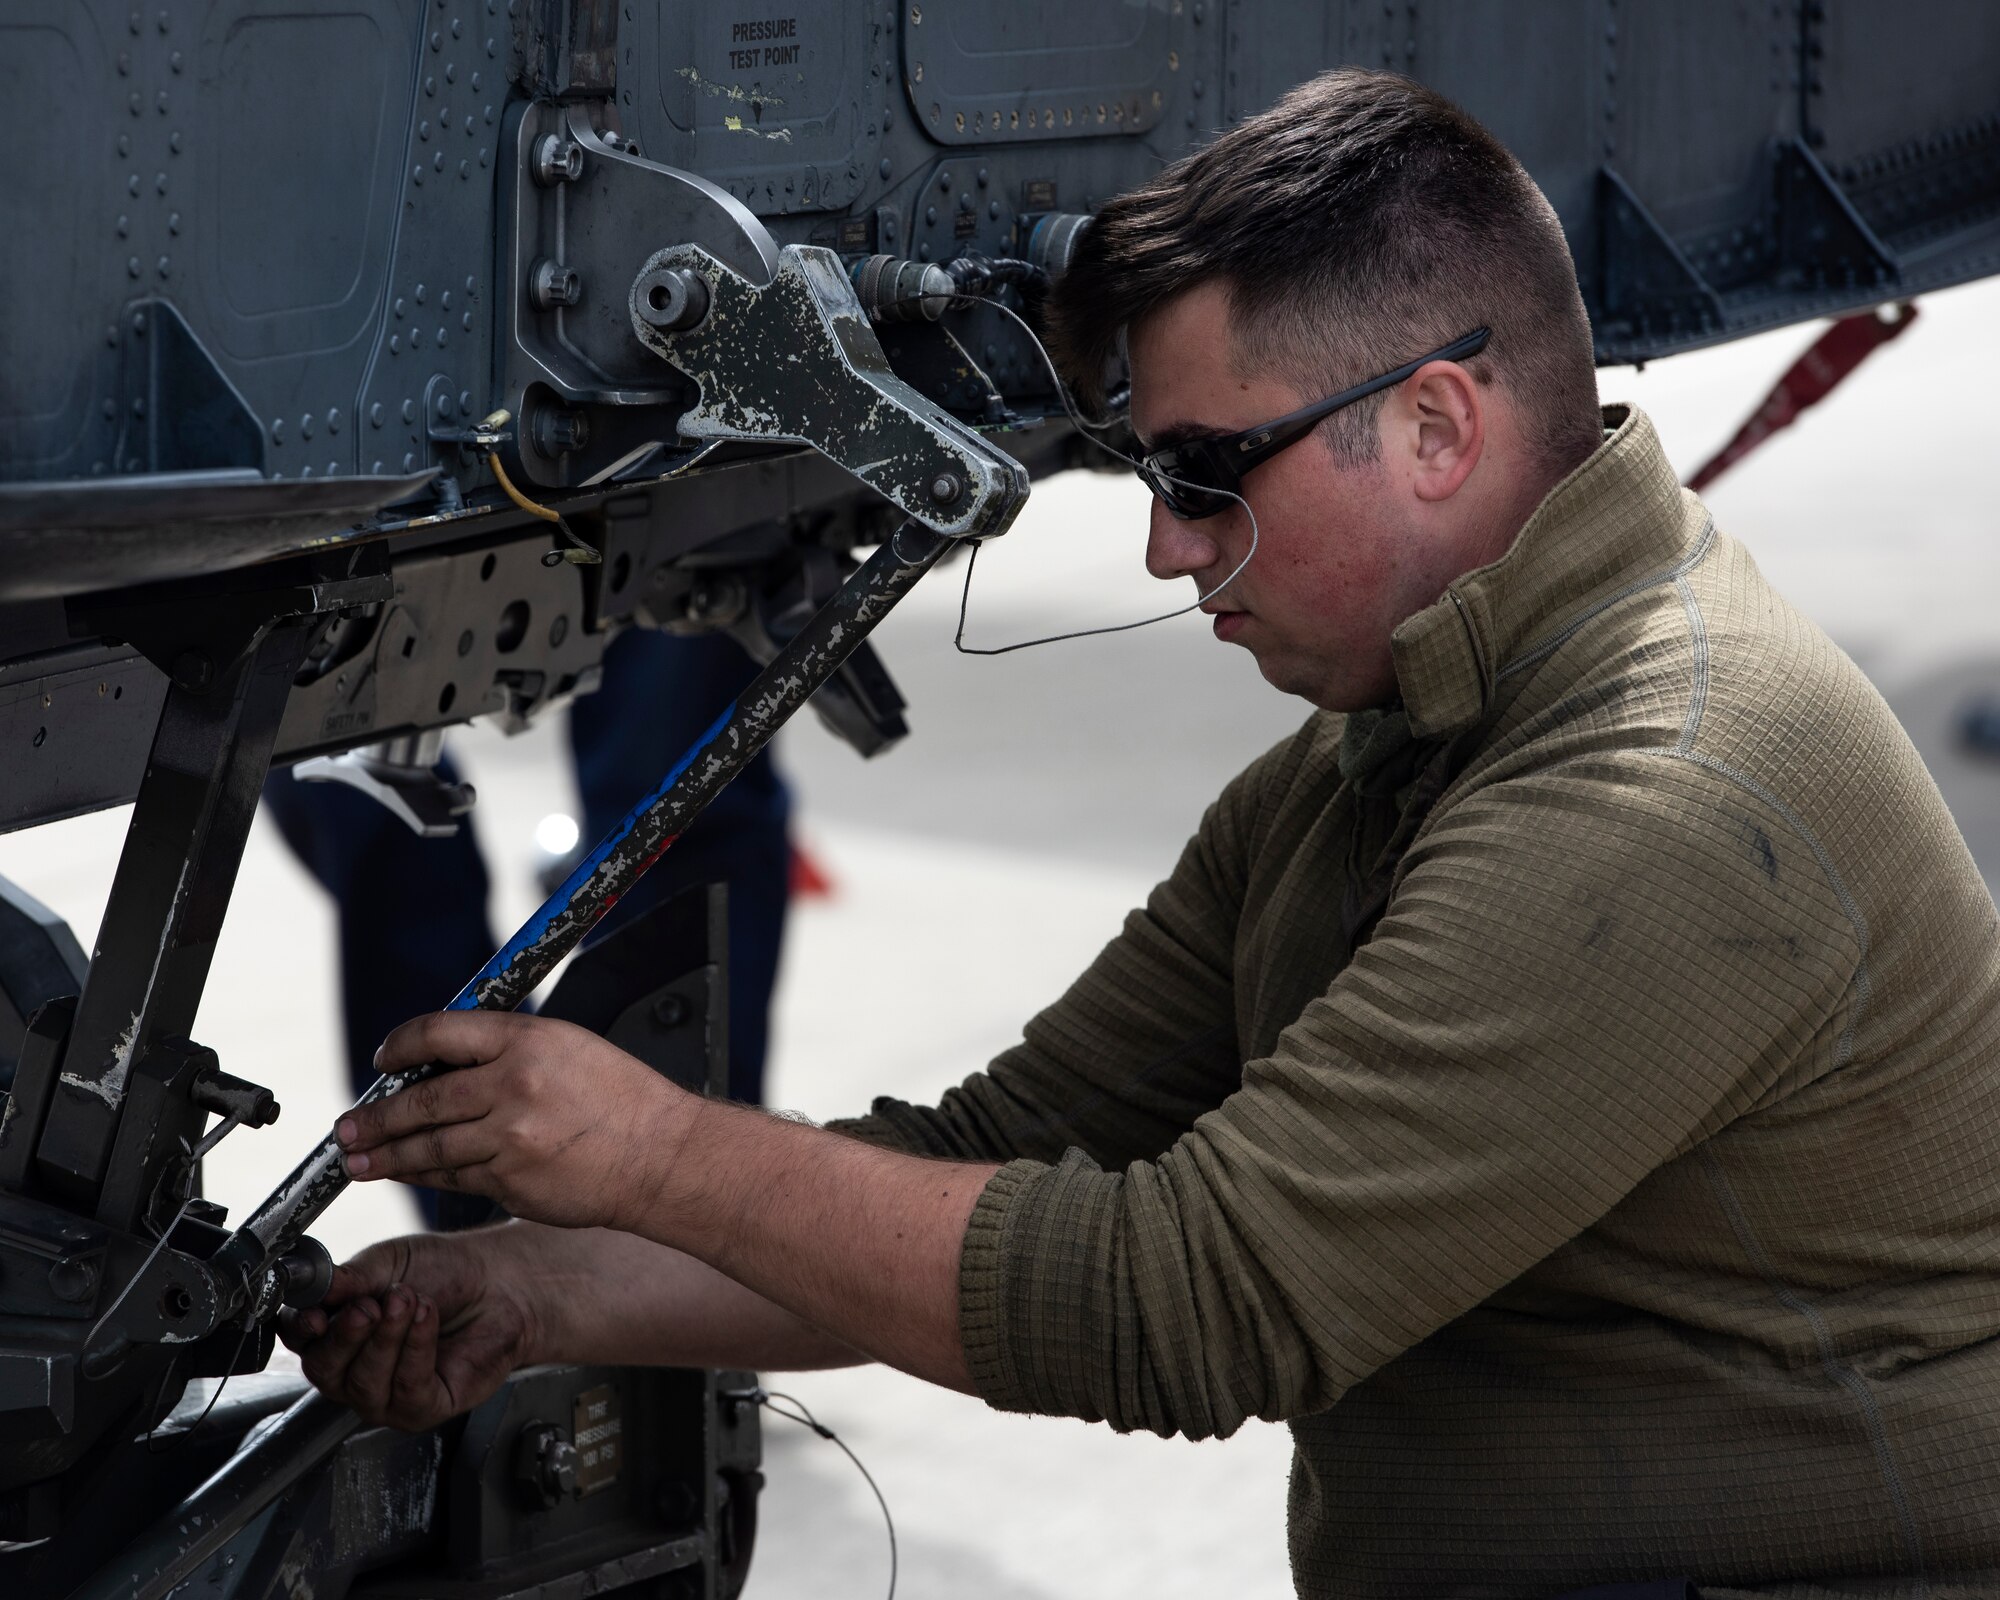 U.S. Air Force Senior Airman Zachery Larson, 48th Aircraft Maintenance Squadron crew chief, conducts a routine service on an F-15E Strike Eagle conformal fuel tank at Royal Air Force Lakenheath, England, July 24, 2020. 48th AMXS Airmen ensure Liberty Wing F-15s are fit to fly and can continue to provide superior airpower capabilities when called upon. (U.S. Air Force photo by Airman 1st Class Jessi Monte)